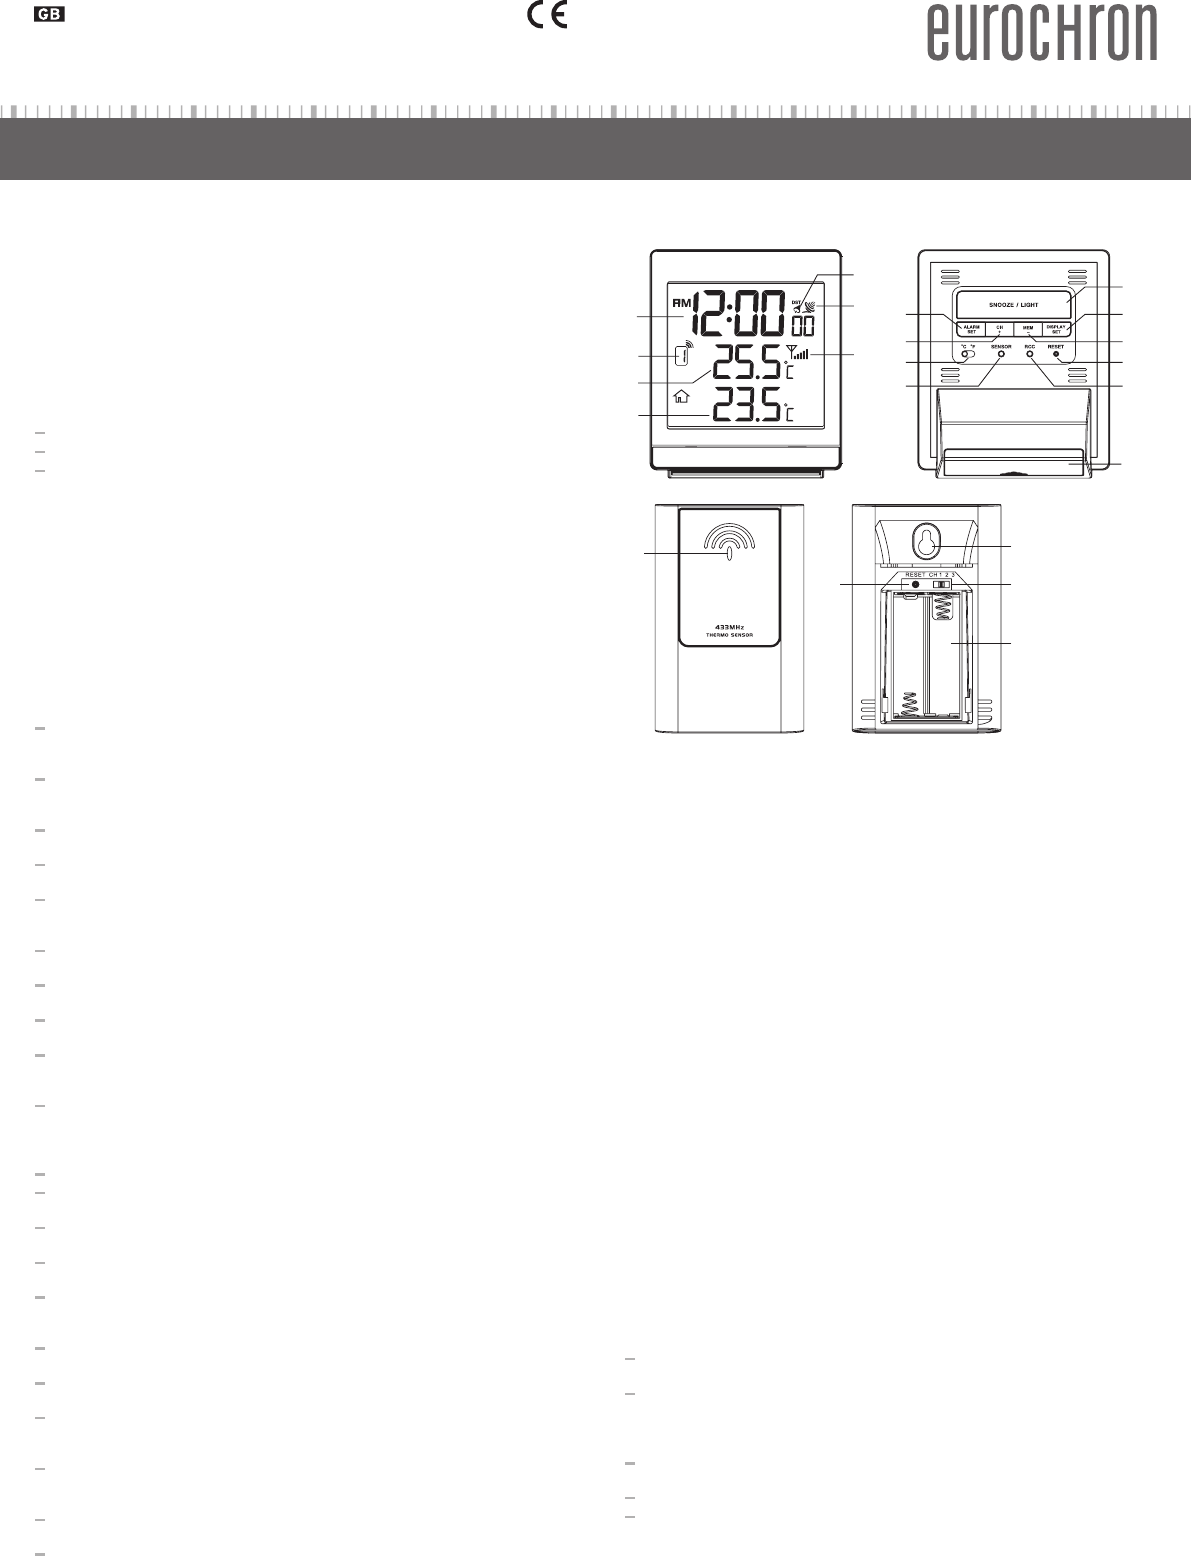 EUROCHRON Radio-controlled weather station : User manual : Page 4